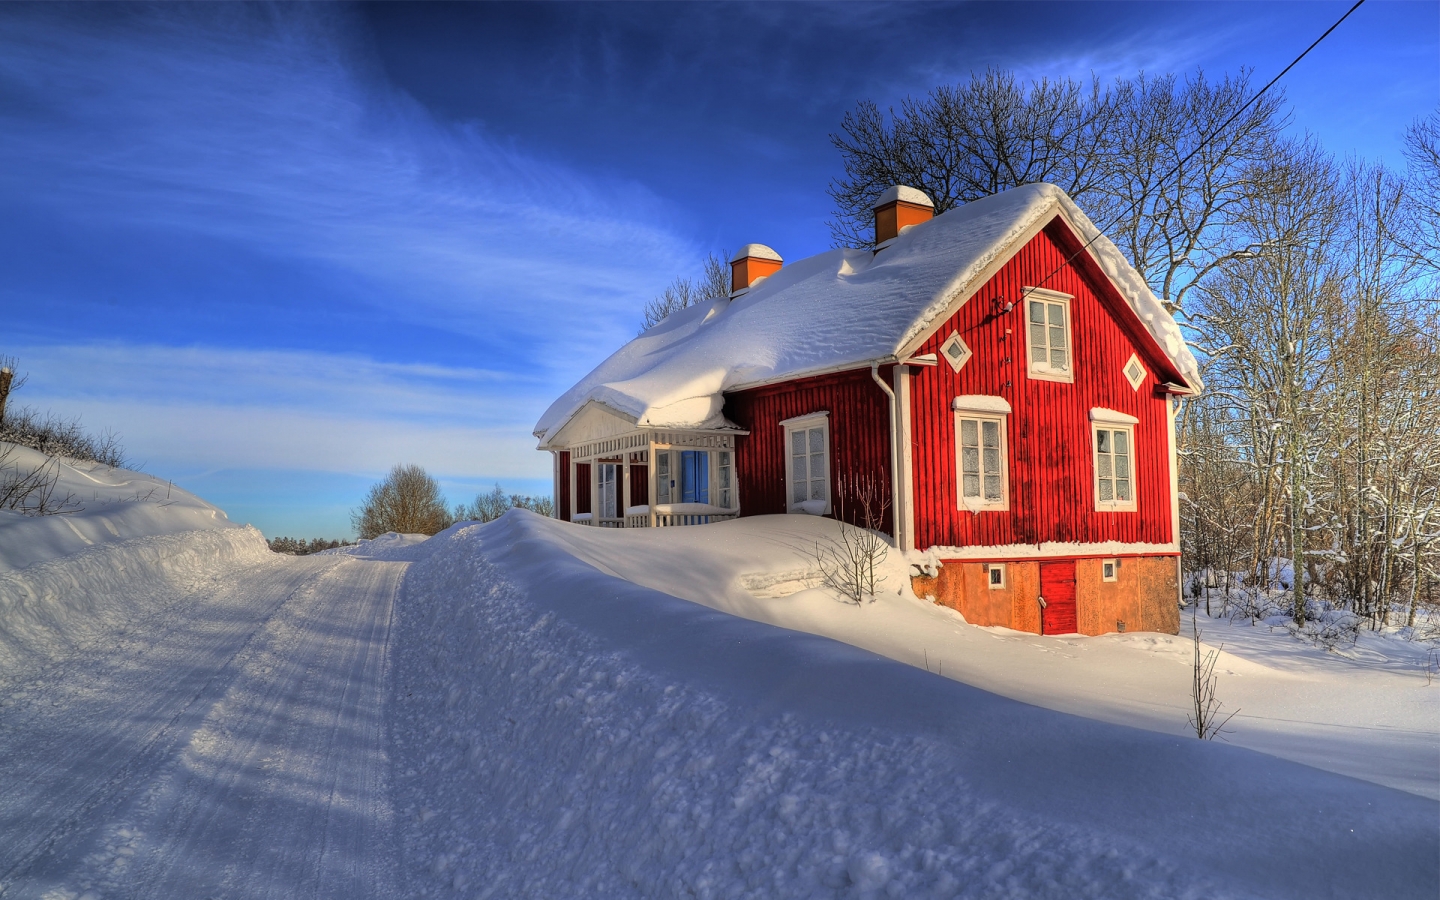 House Between Snow for 1440 x 900 widescreen resolution